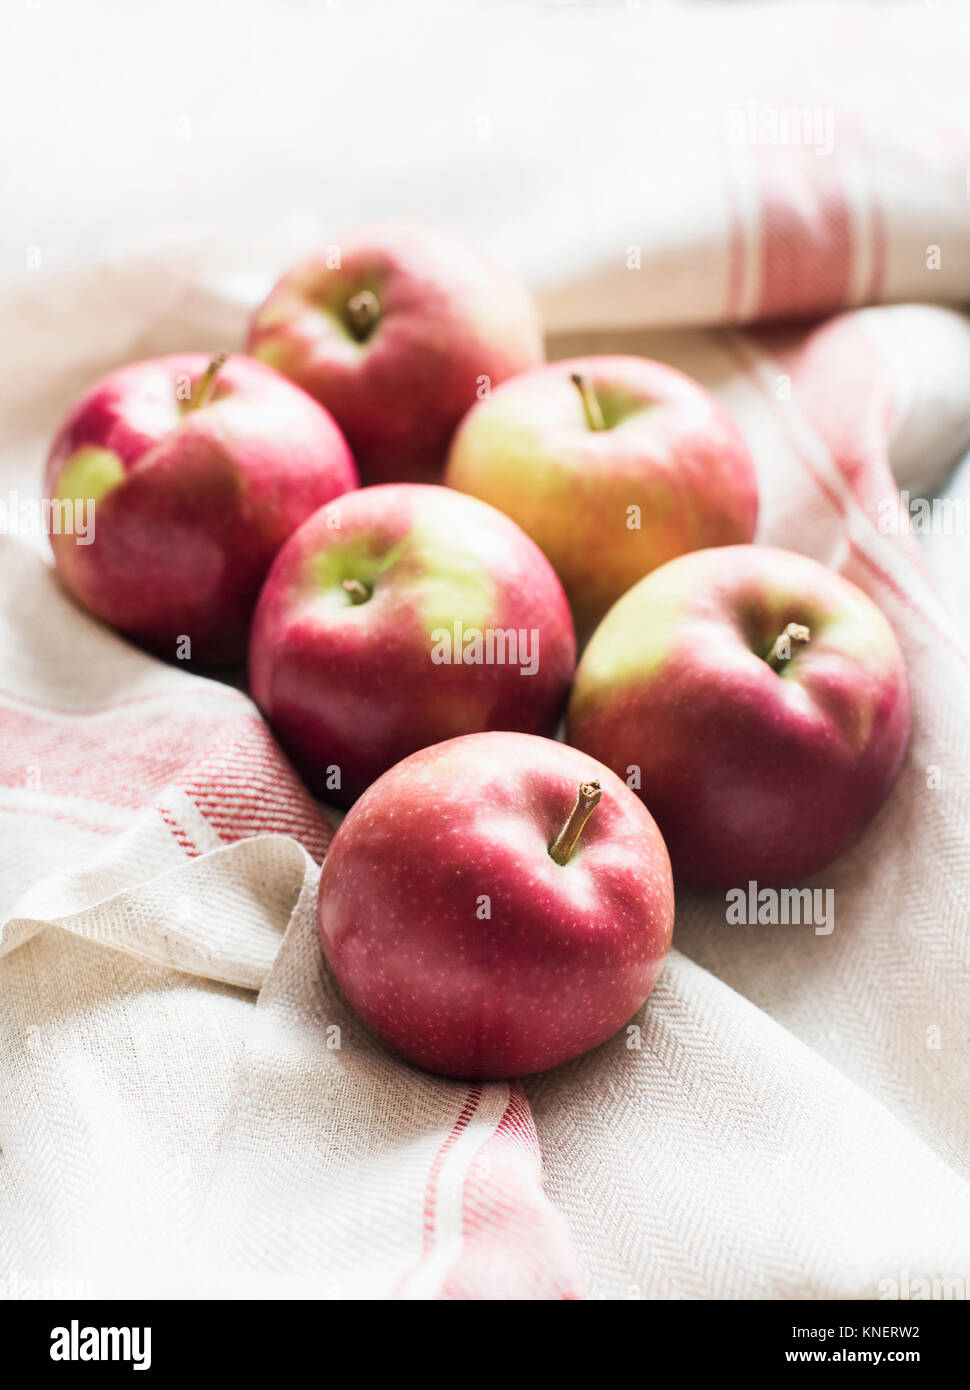 https://c8.alamy.com/comp/KNERW2/six-red-apples-on-linen-kitchen-cloth-close-up-KNERW2.jpg